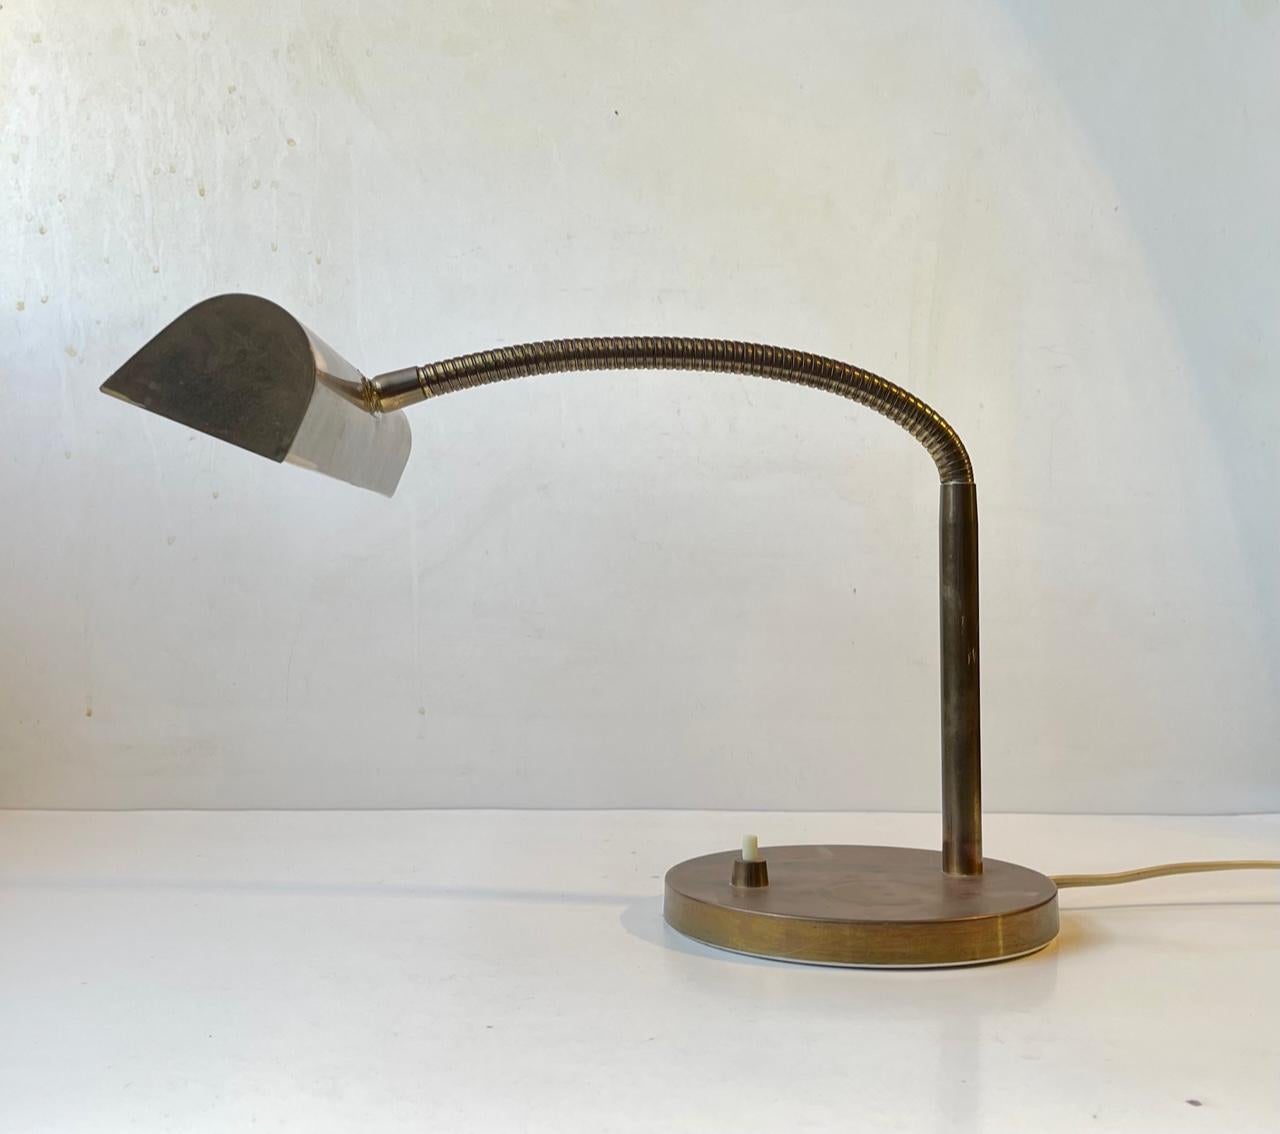 This midcentury danish bankers or librarians table light features two light-sources. Its made entirely out of brass and has a multi-adjustable gooseneck that allows you to direct the light in any direction. It was manufactured by E. S. Horn in